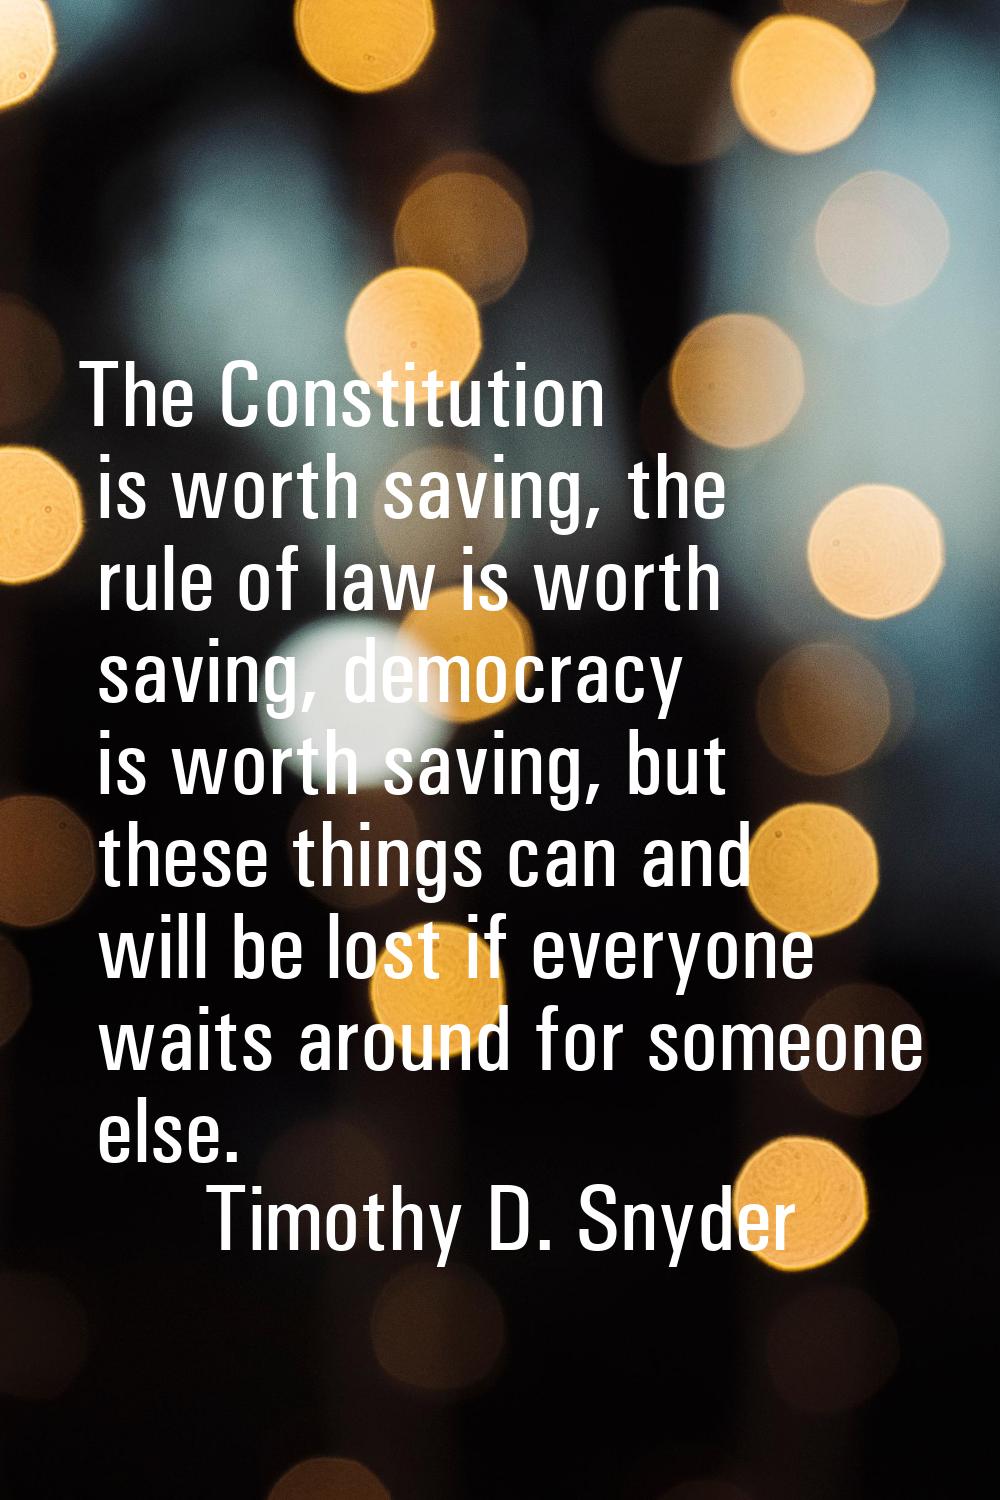 The Constitution is worth saving, the rule of law is worth saving, democracy is worth saving, but t